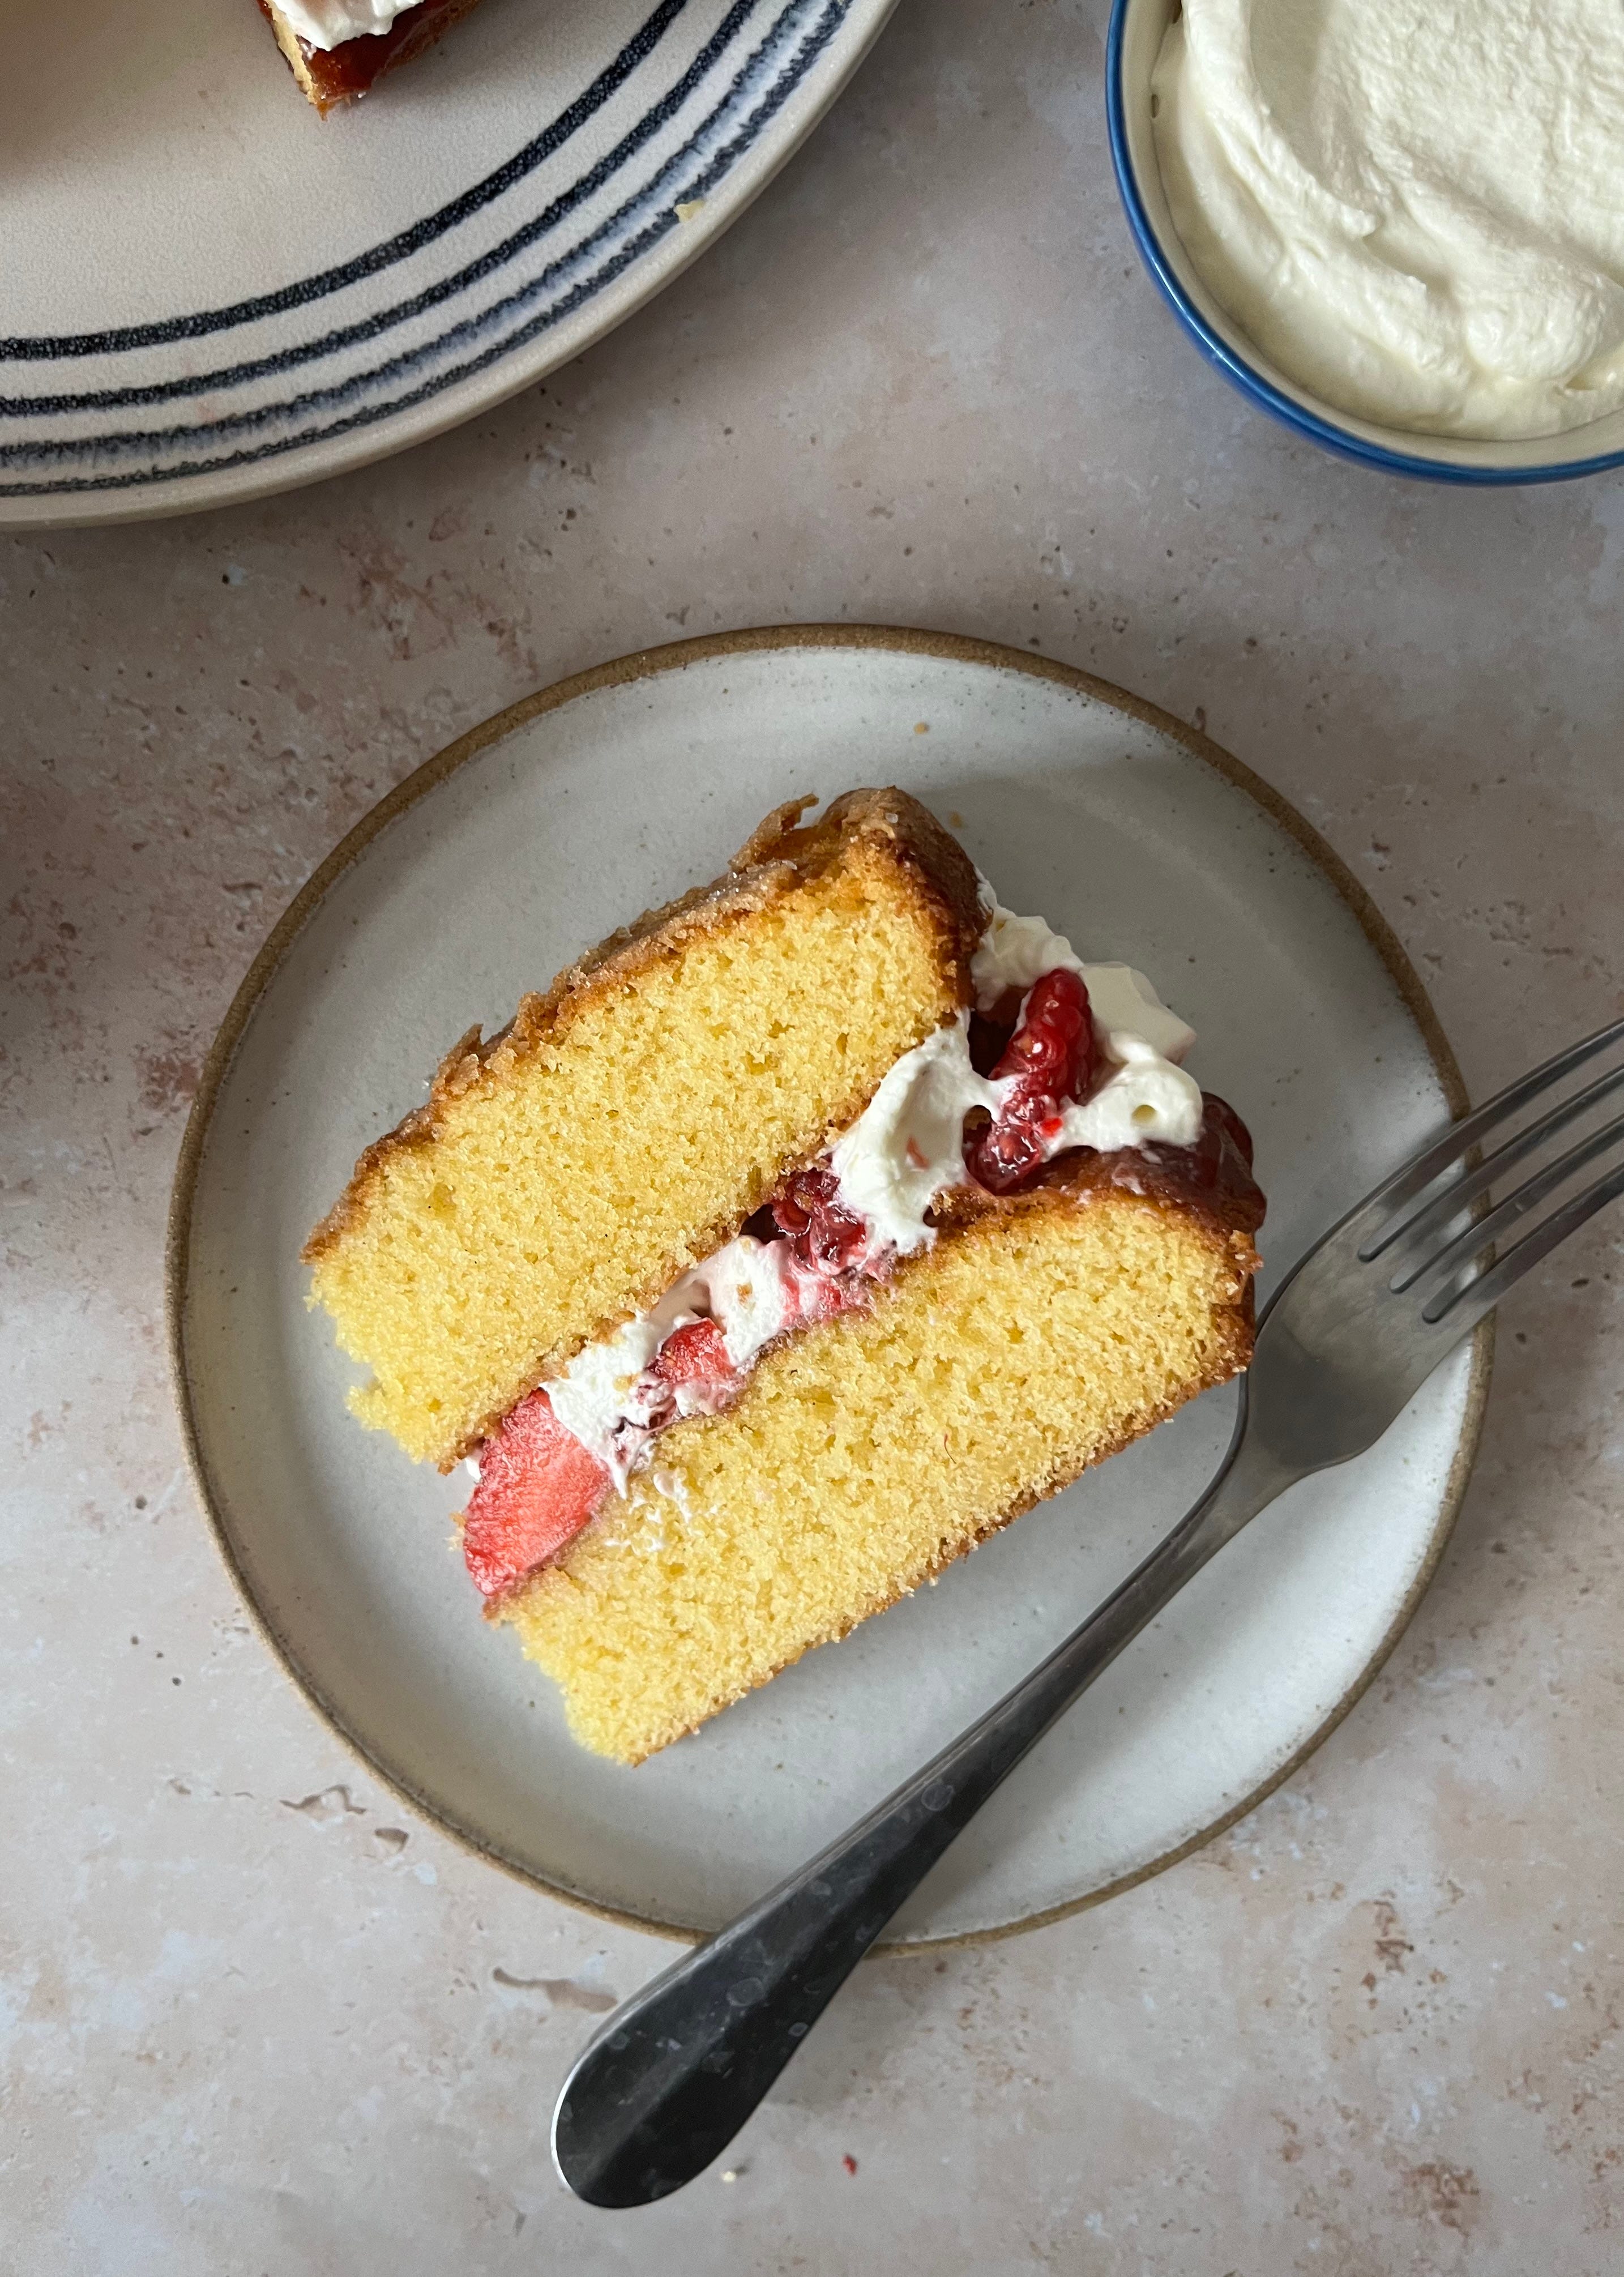 Adventures in Ratio Baking: Too Many Types of Cake – The Lily Cafe